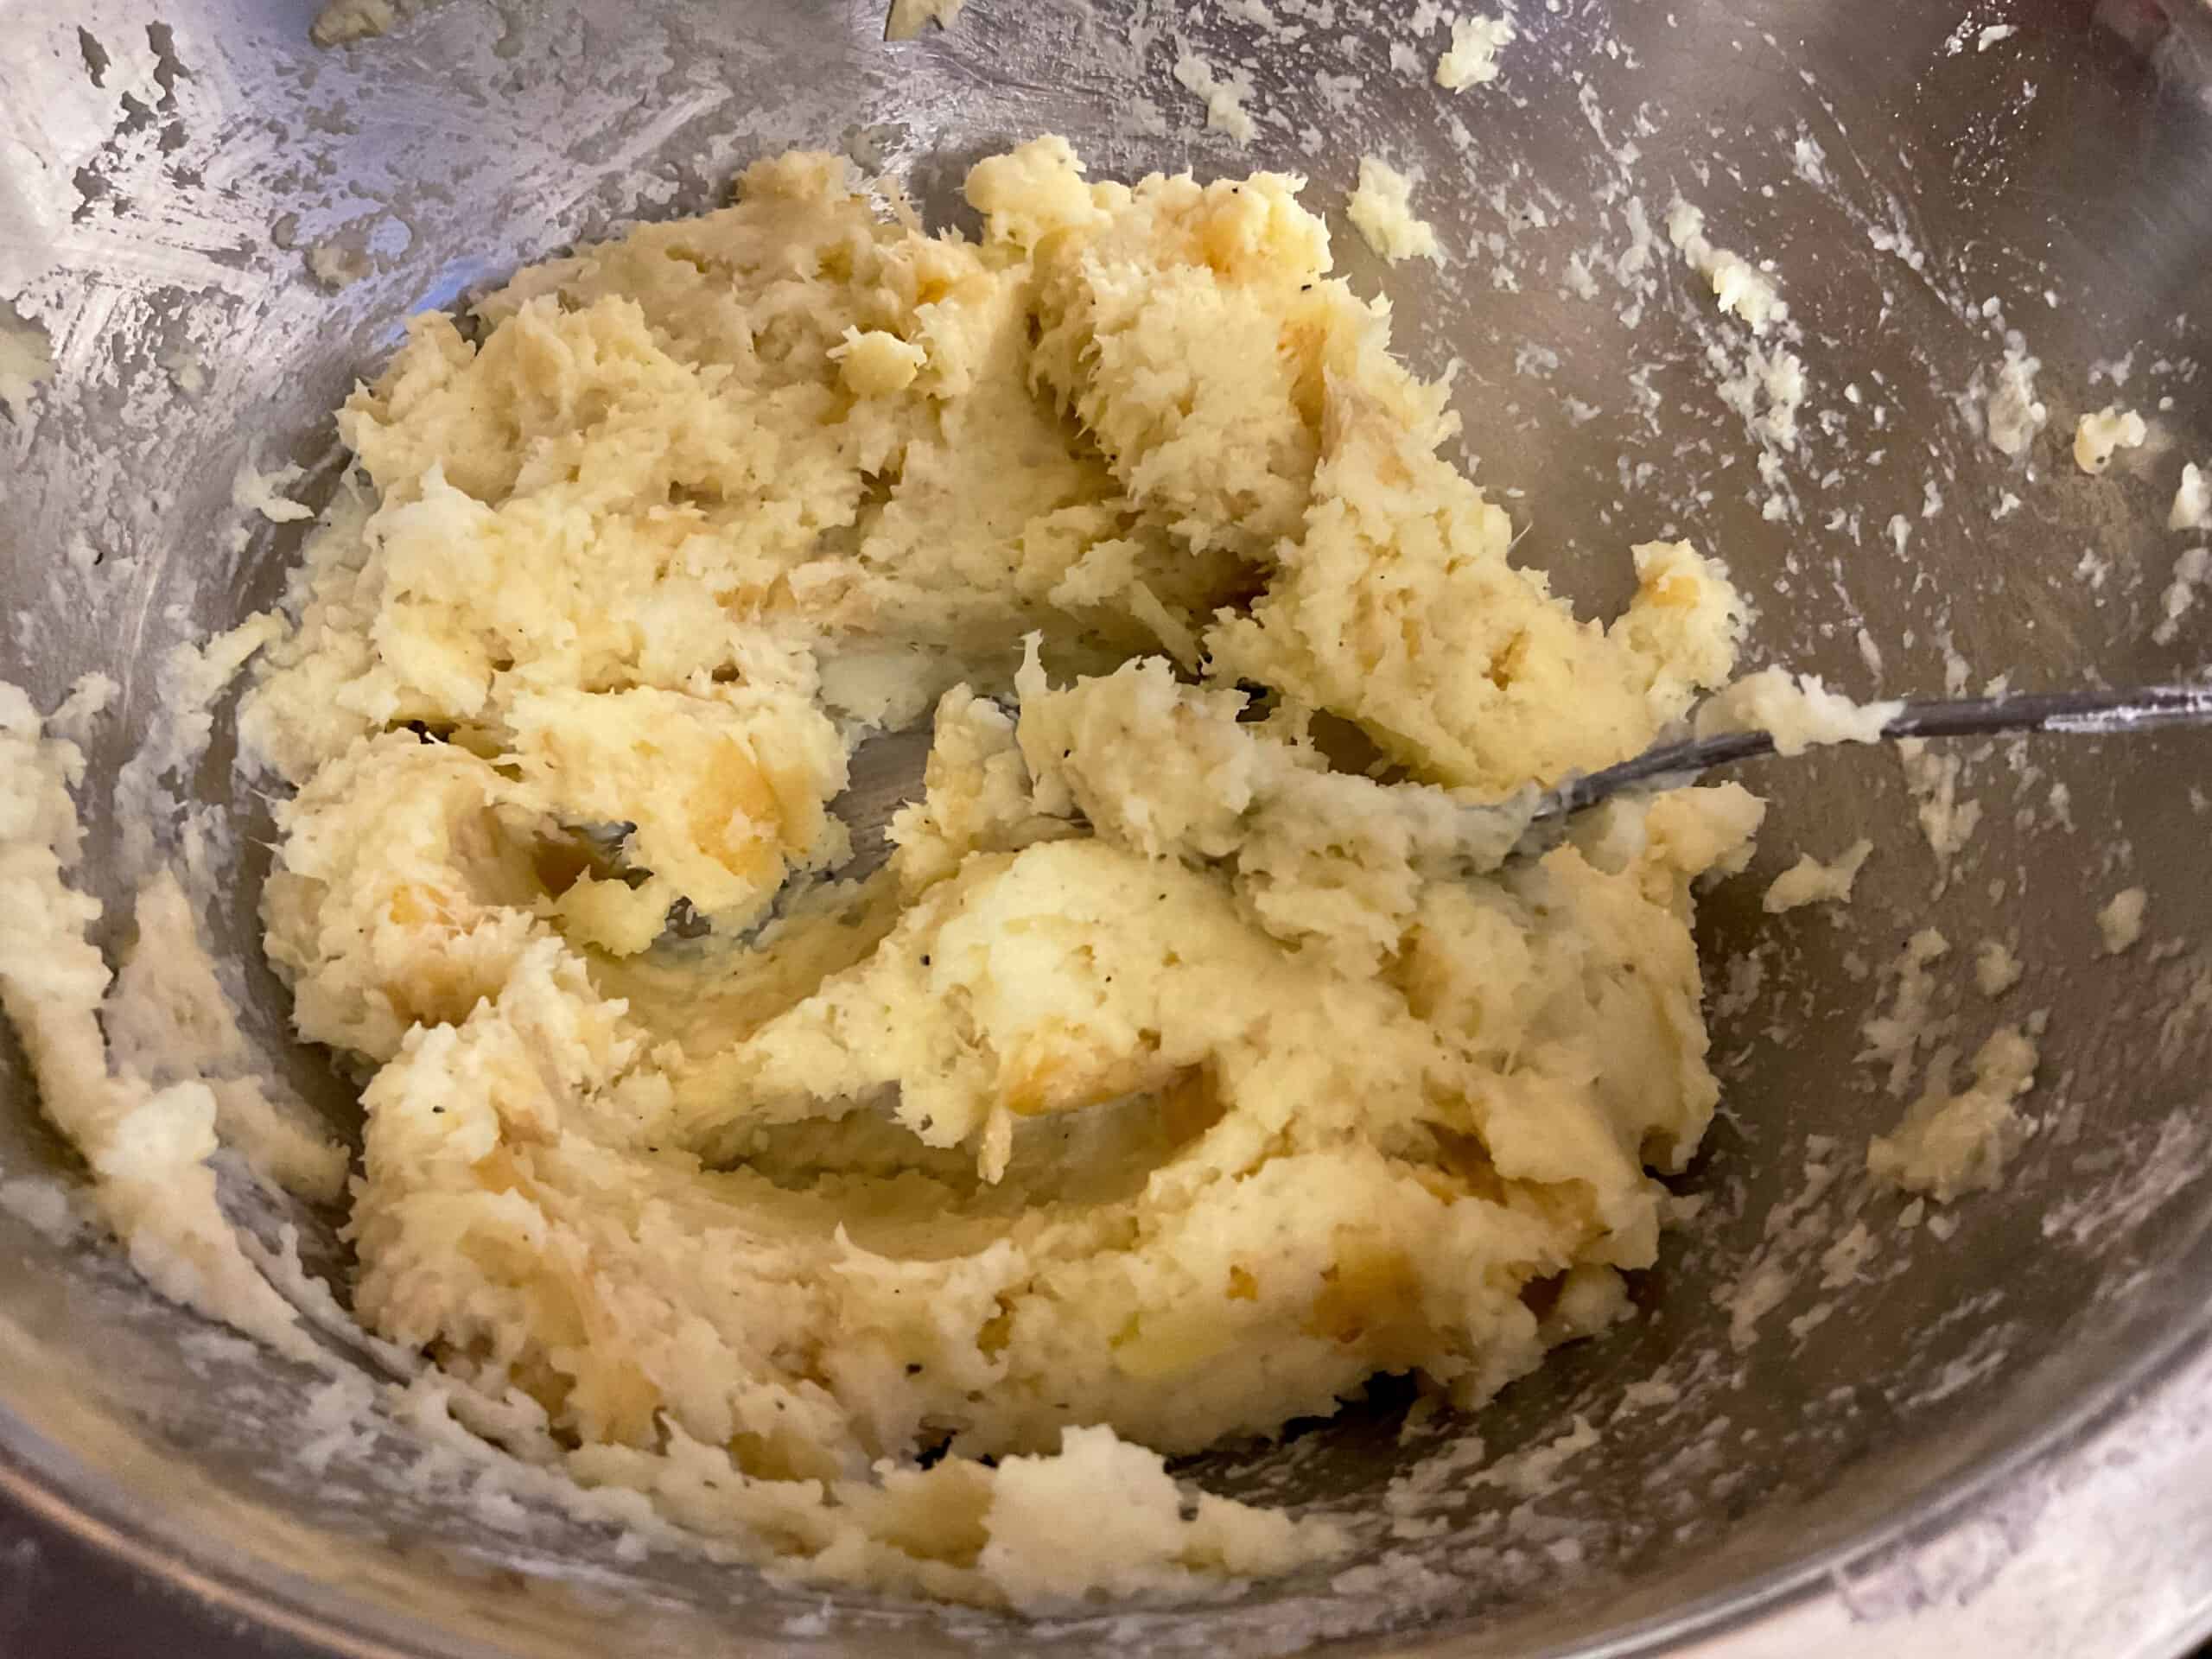 Parsnips mashed and seasoning mixed through ready to make into patties.